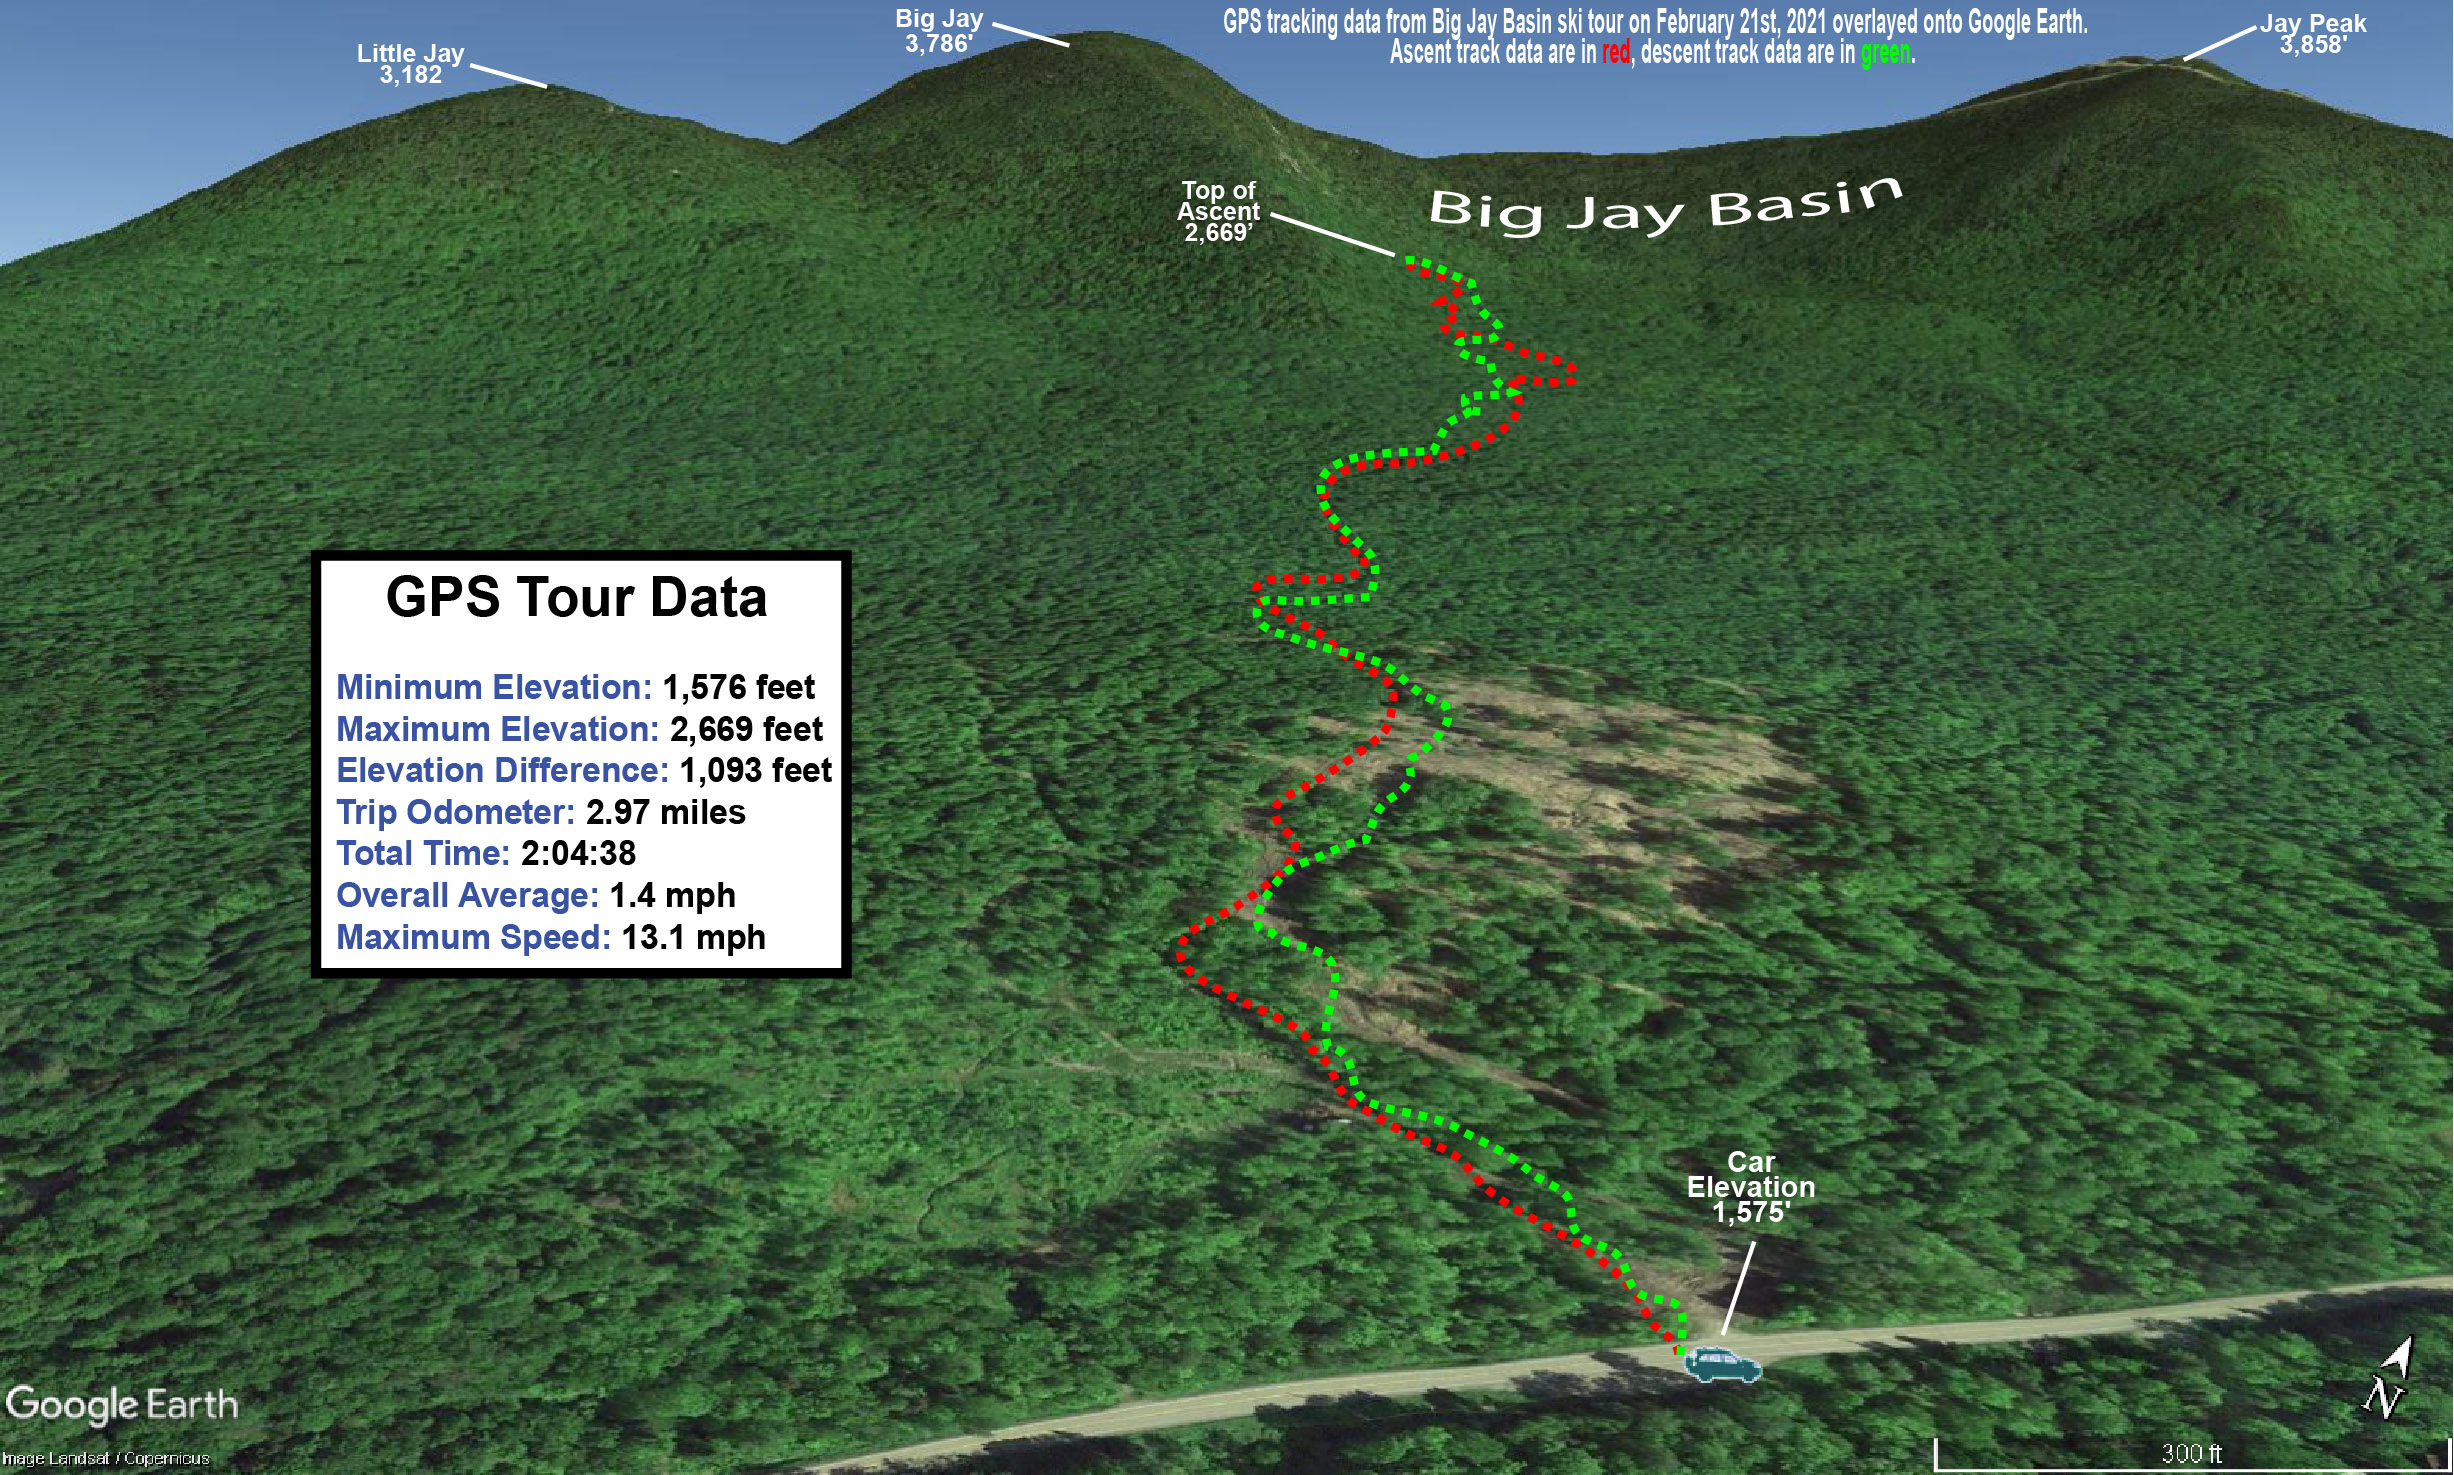 A map showing GPS data on Google Earth for a backcountry ski tour in the Big Jay Basin area near Jay Peak Resort in Vermont